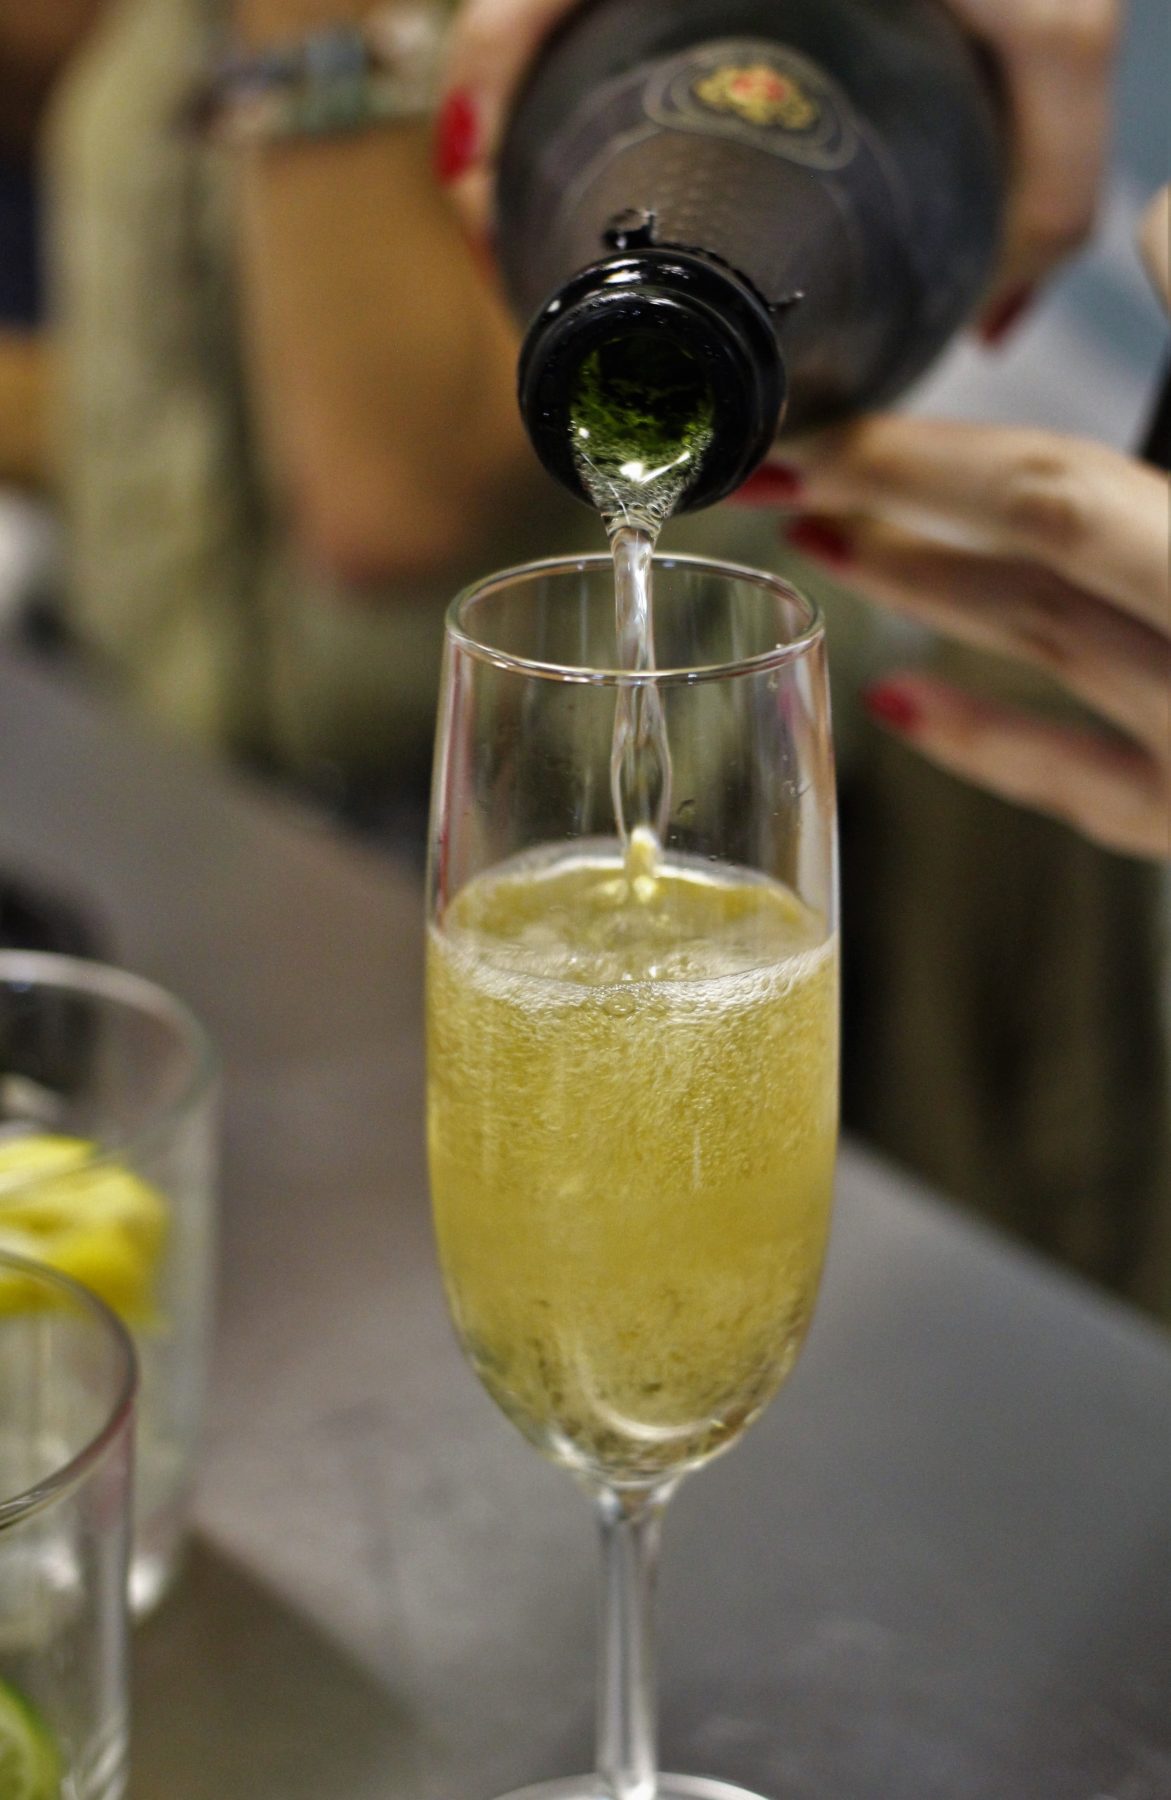 Ending our cocktail workshop with champagne, always a good idea.